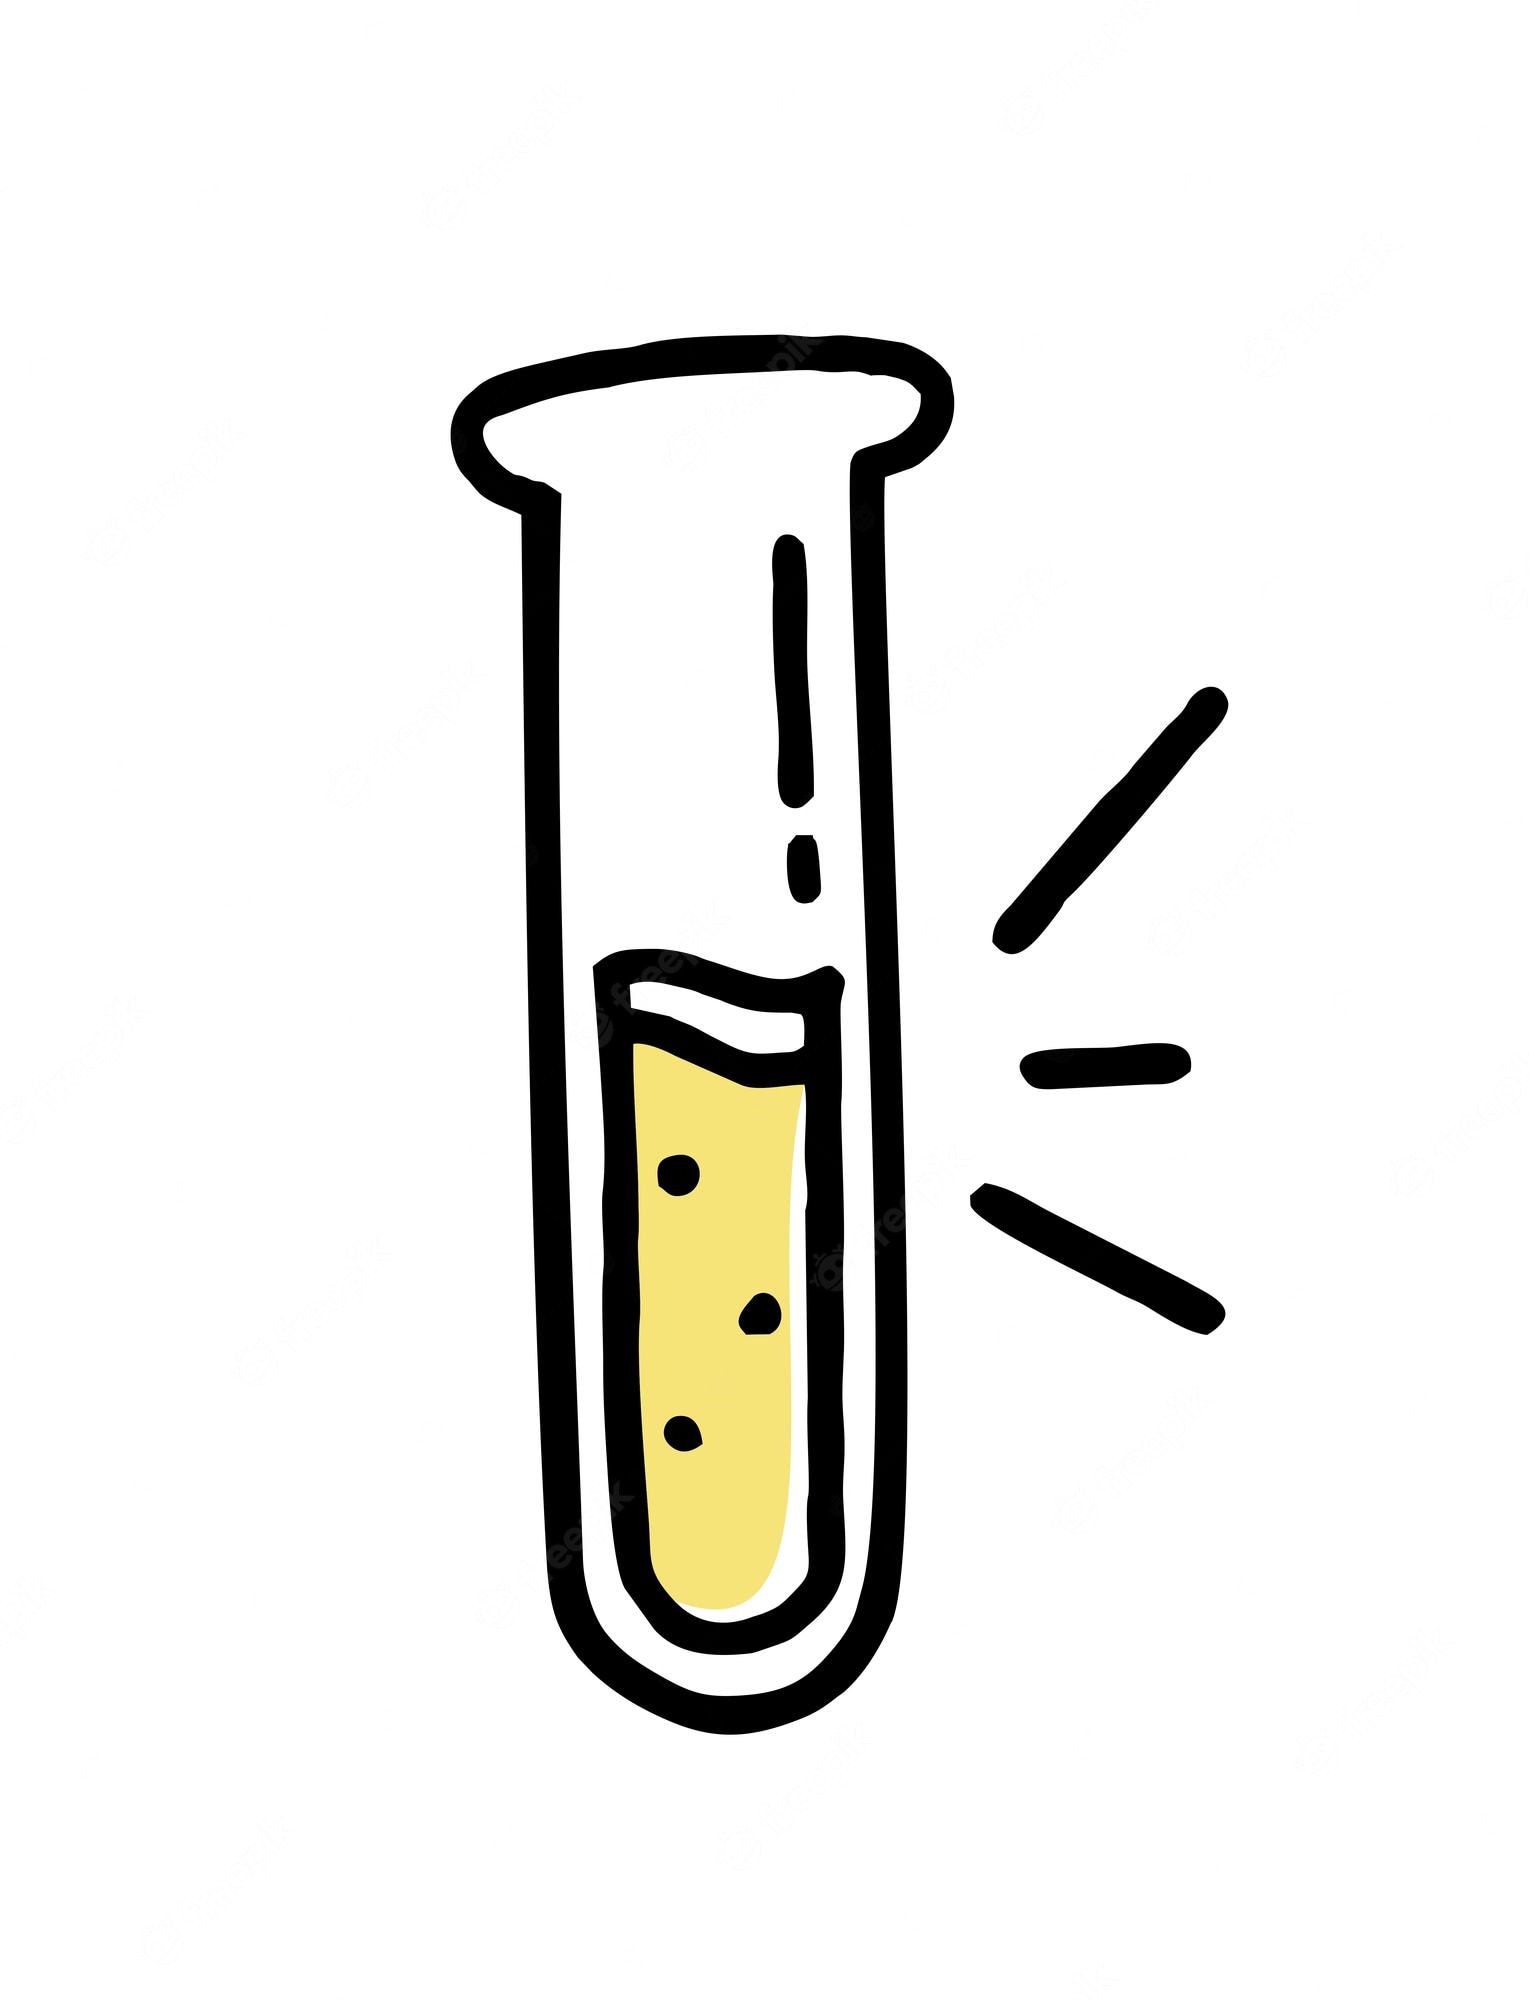 Objects - Test Tube Clipart - 1840x2400 PNG Download - PNGkit - Clip ...